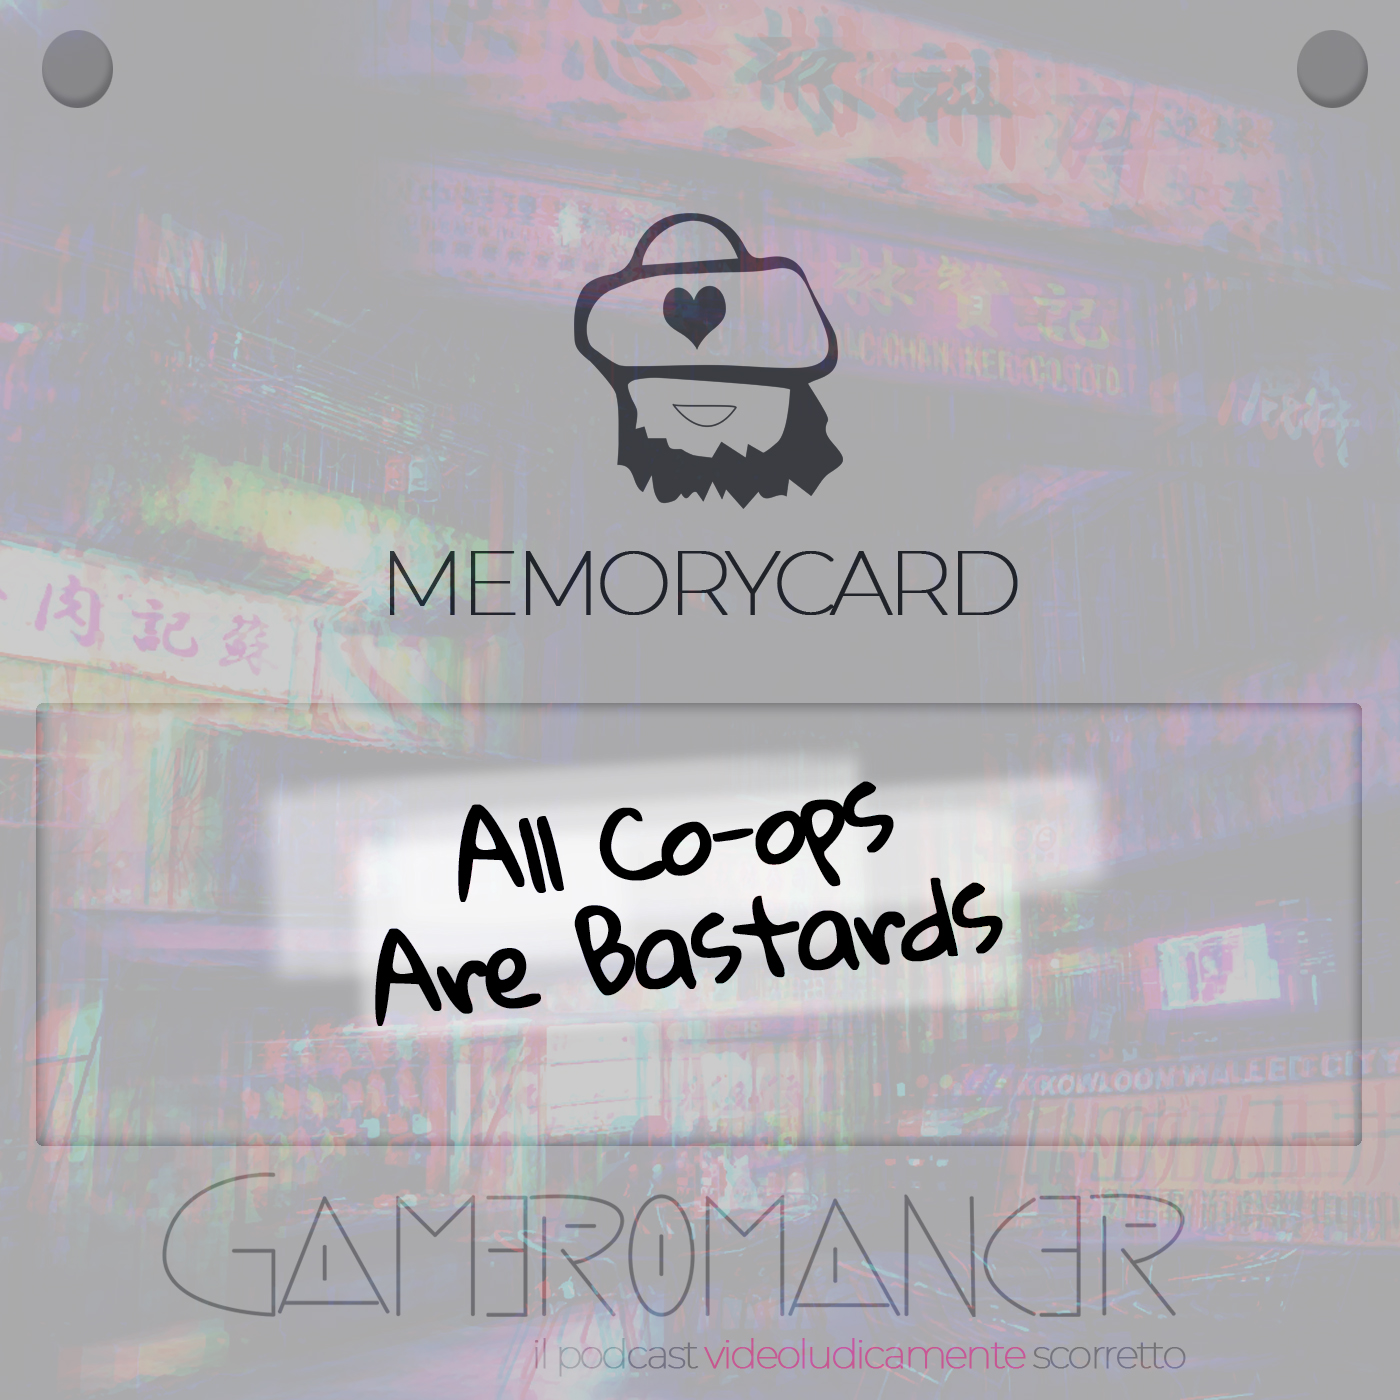 MemoryCard: All Co-Ops Are Bastards